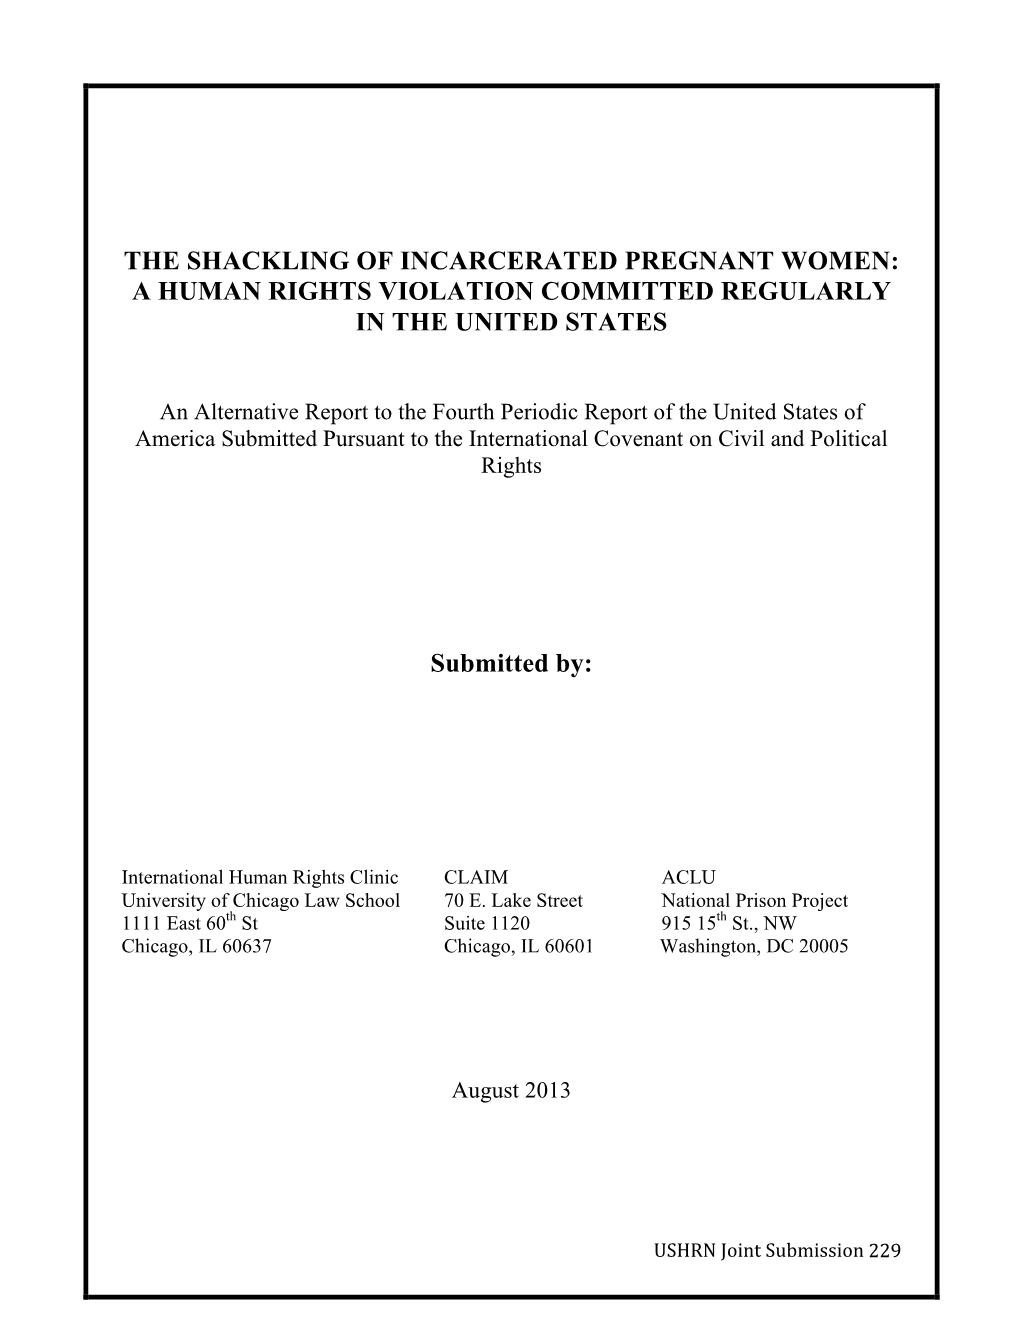 The Shackling of Incarcerated Pregnant Women: a Human Rights Violation Committed Regularly in the United States